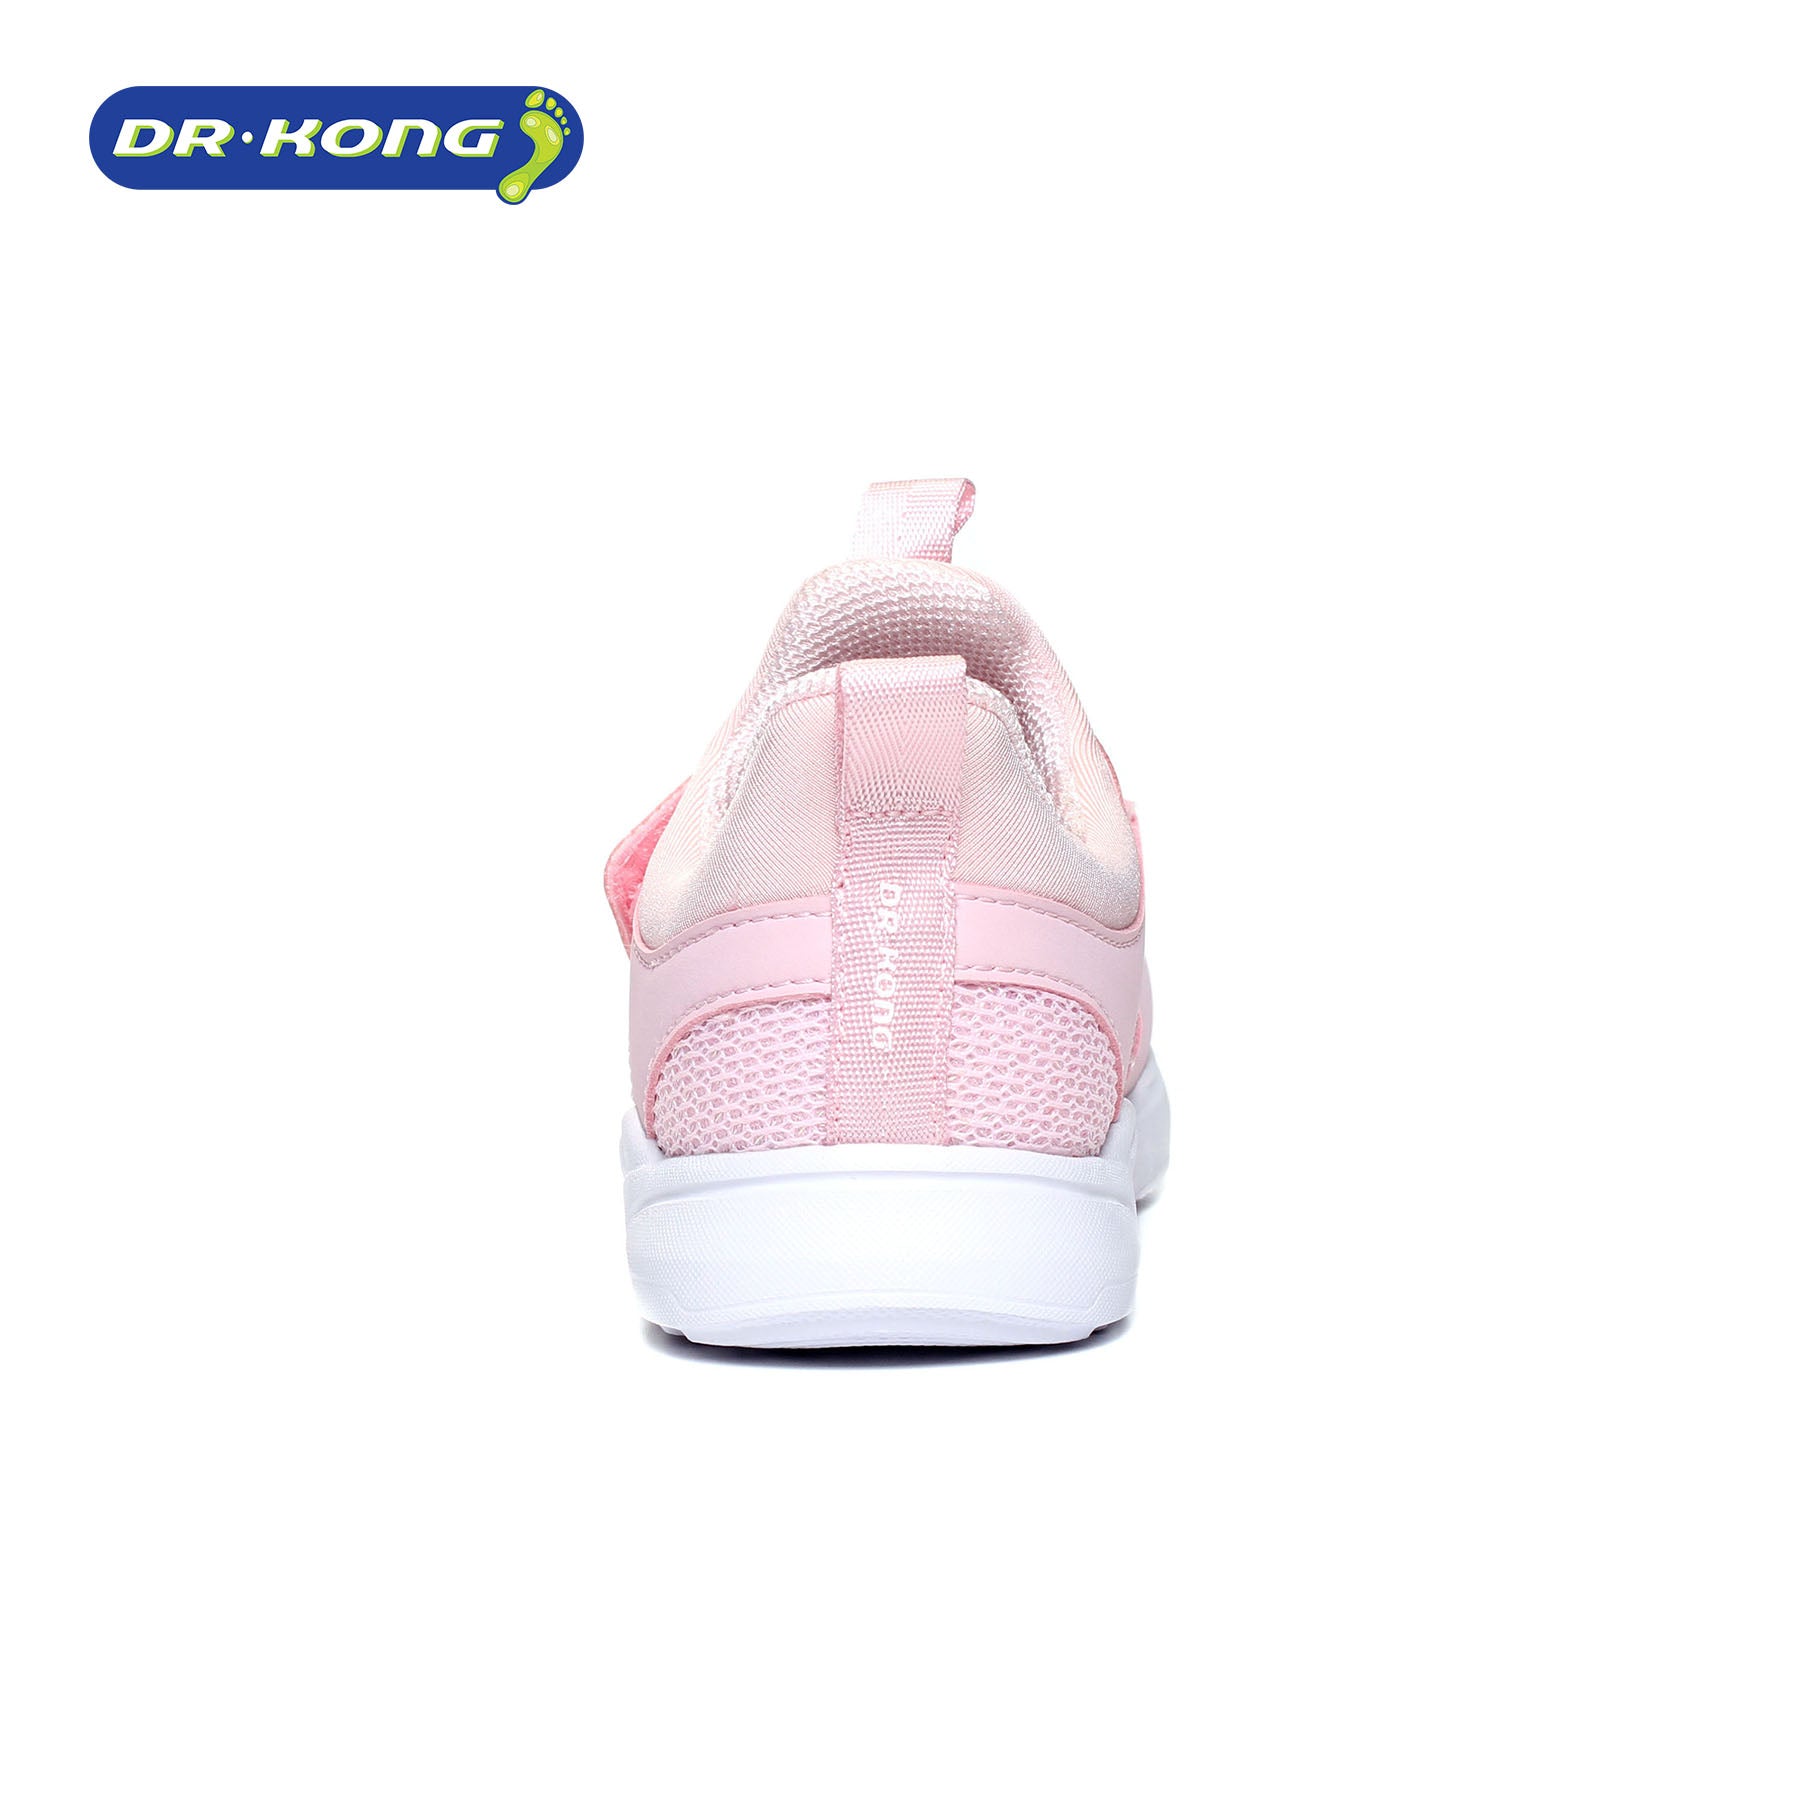 Dr. Kong Baby 123 Rubber Shoes B1400564